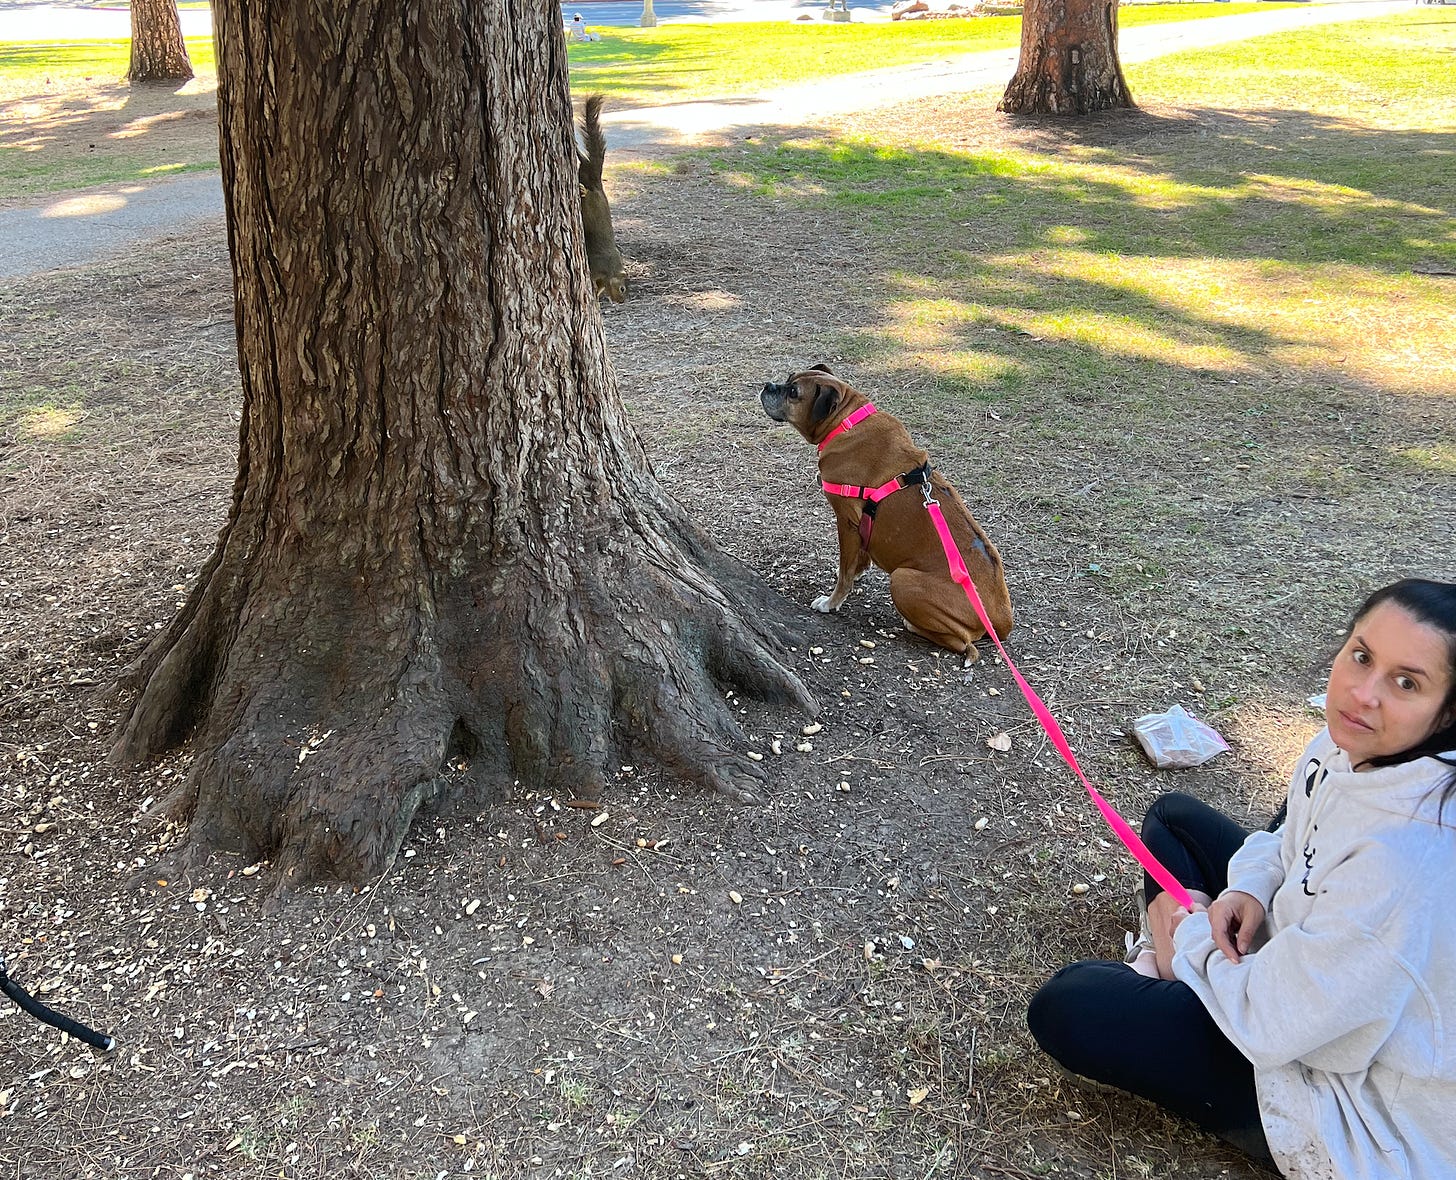 A squirrel descends the tree to meet Martha!